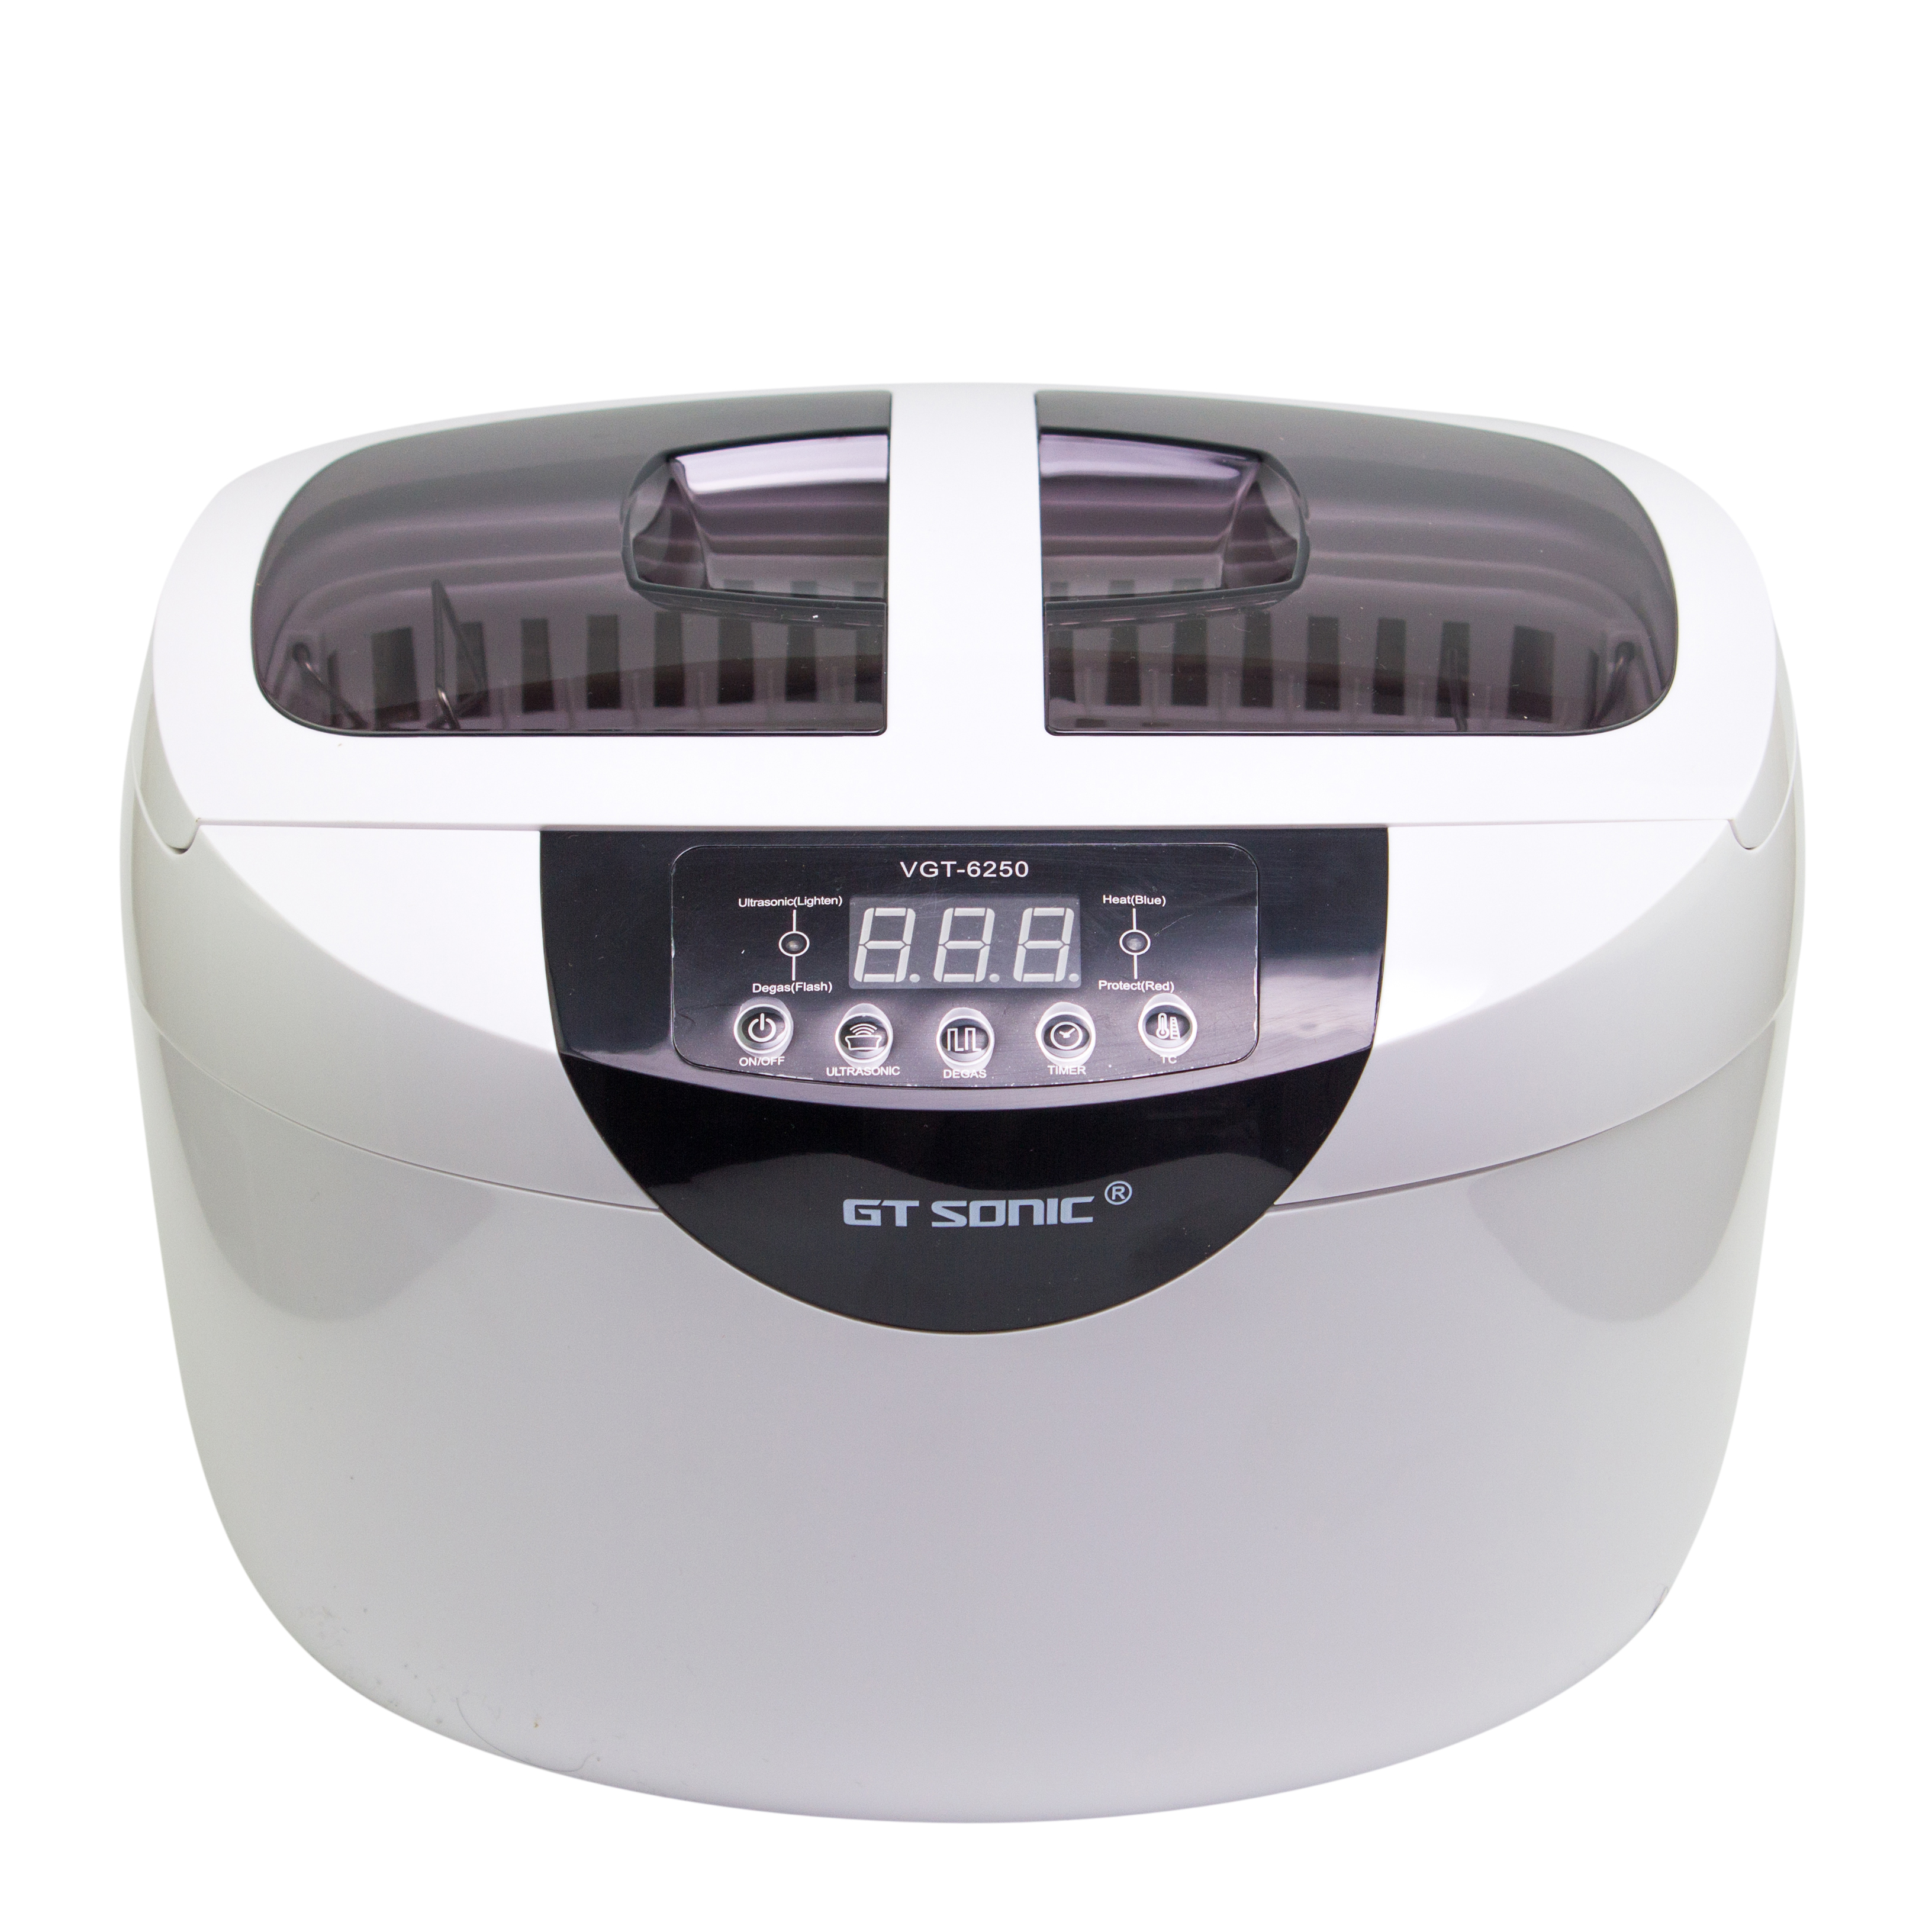 Good User Reputation for Ultrasonic Cleaner Uv - Faceshowes Ultrasonic vgt- 6250 digital ultrasonic cleaner for Jewelry and watch – Rongfeng